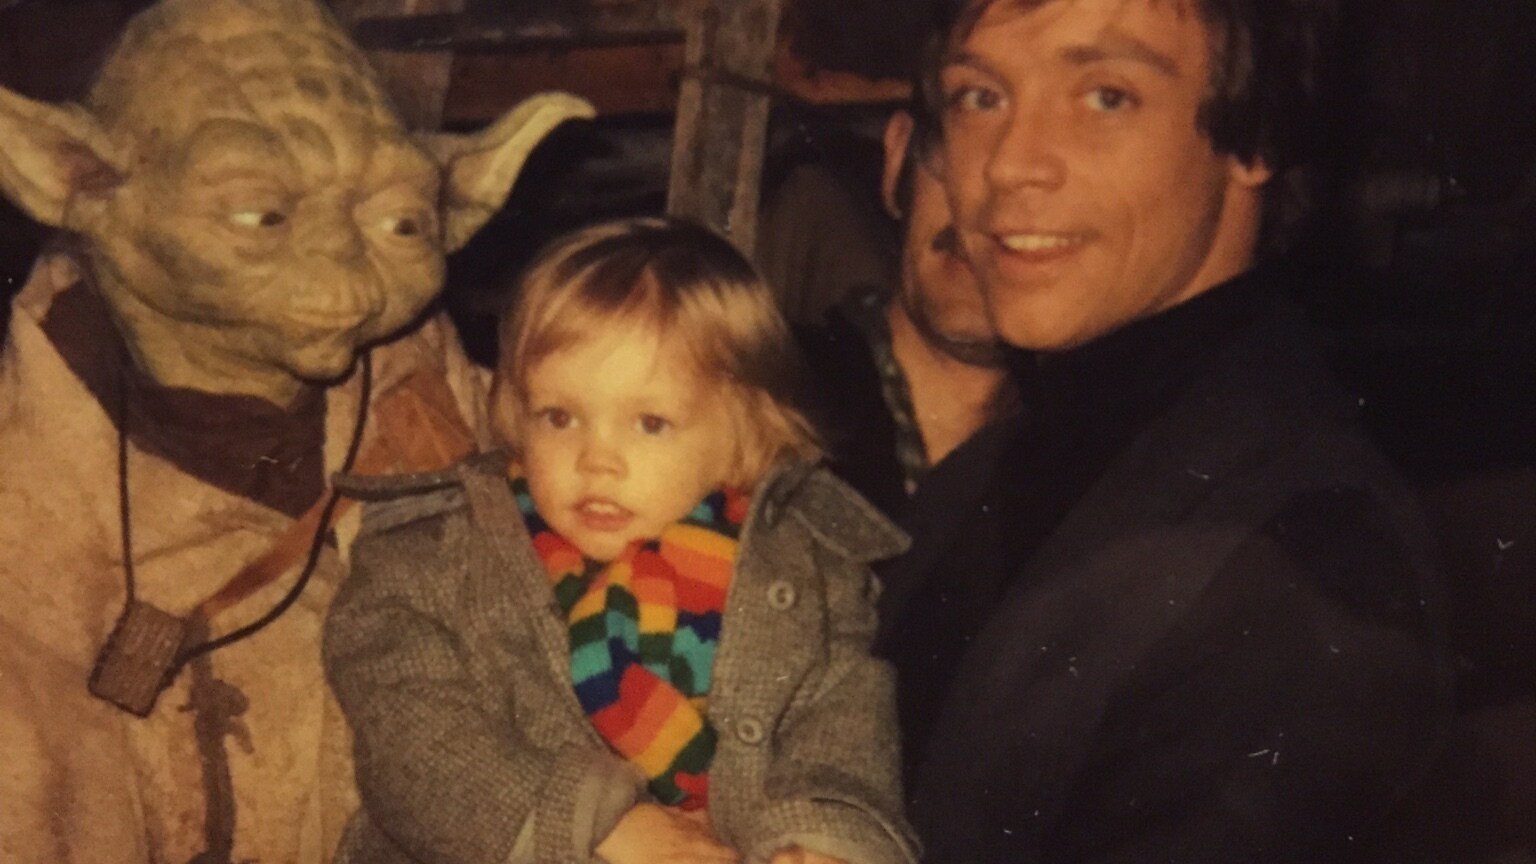 Your father he is: a curious Yoda, Nathan Hamill, Frank Oz, and Mark Hamill.